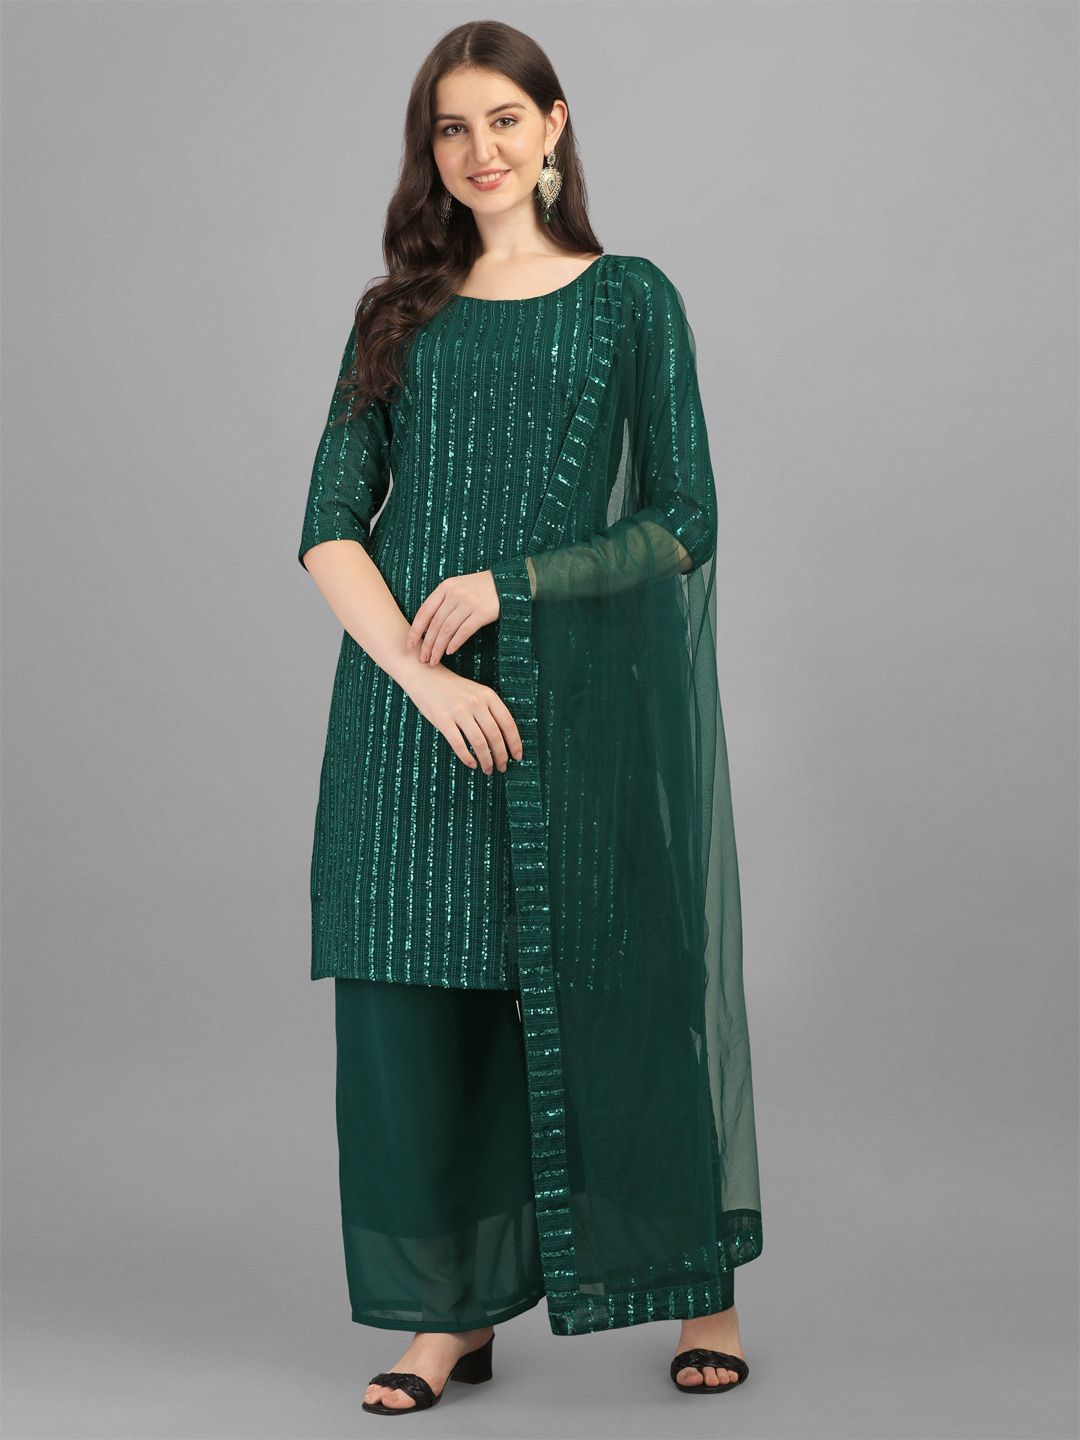 JATRIQQ Teal Embroidered Faux Georgette Semi-Stitched Dress Material Price in India